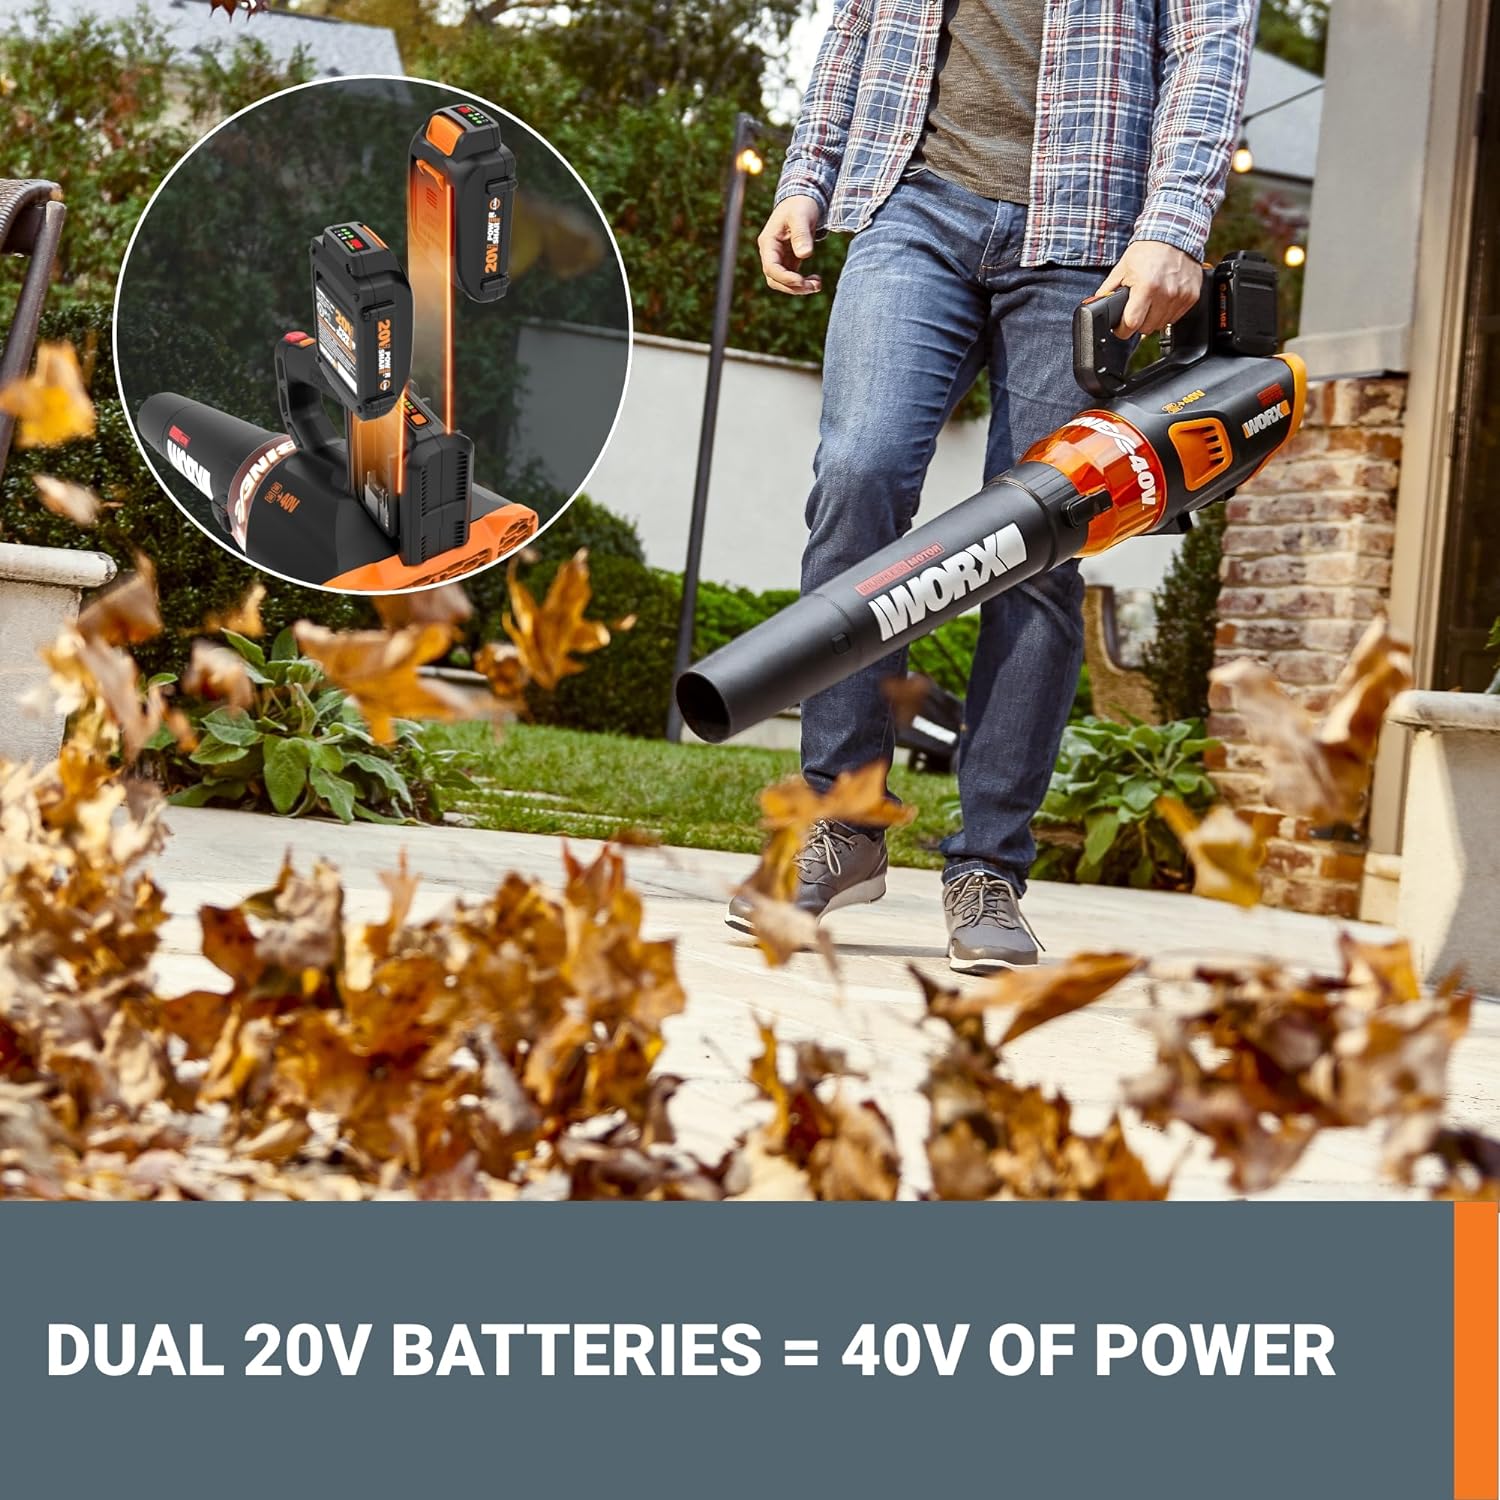 https://bigbigmart.com/wp-content/uploads/2023/10/Worx-40V-Turbine-Leaf-Blower-Cordless-with-Battery-and-Charger-Brushless-Motor-Blowers-for-Lawn-Care-Compact-and-Lightweight-Cordless-Leaf-Blower-WG584-%E2%80%93-2-Batteries-Charger-Included5.jpg